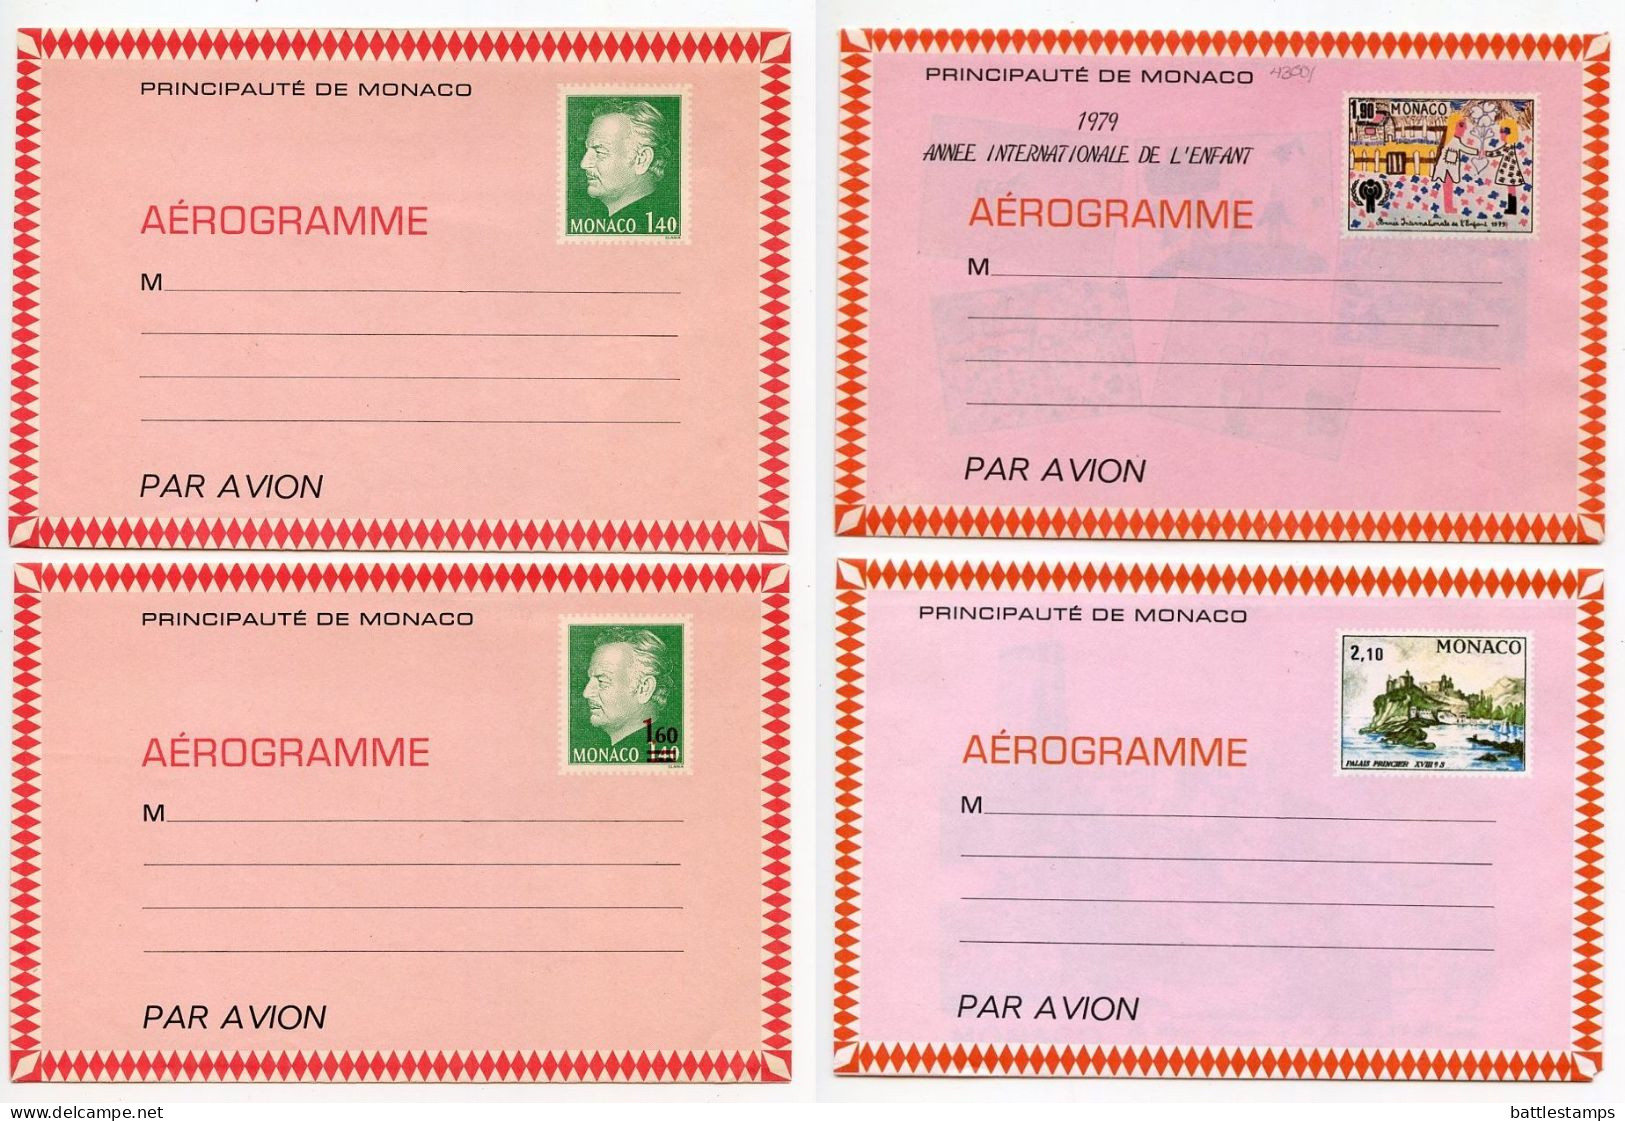 Monaco 1970's 4 Different Mint Aeogrammes - Prince Rainier III, Royal Place & International Year Of The Child - Postal Stationery